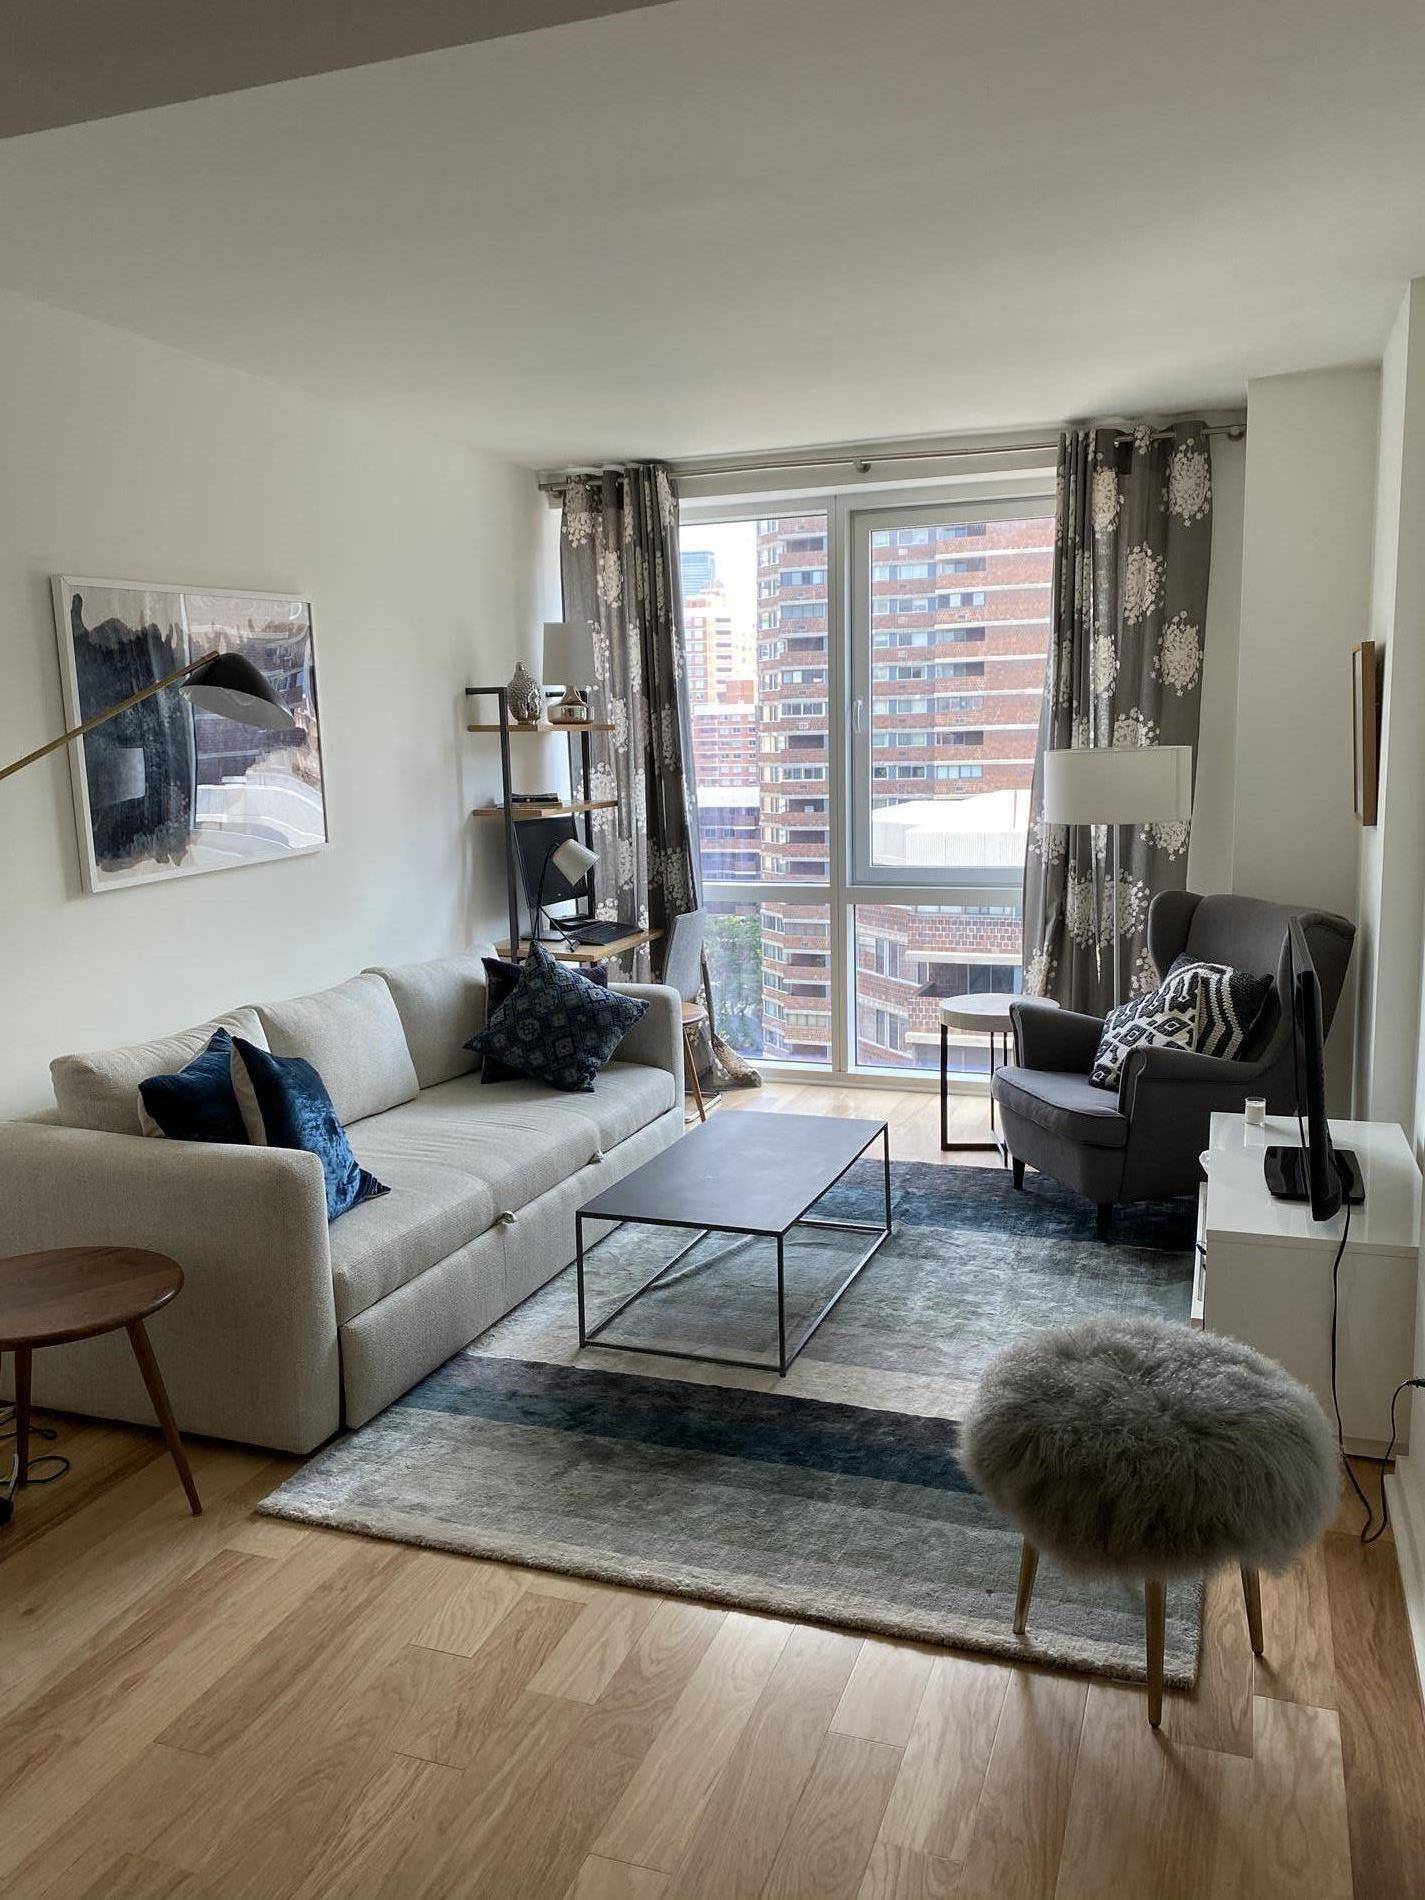 If you're looking for condo living in a modern doorman elevator building, but aren't ready to purchase then this is the apartment for you.